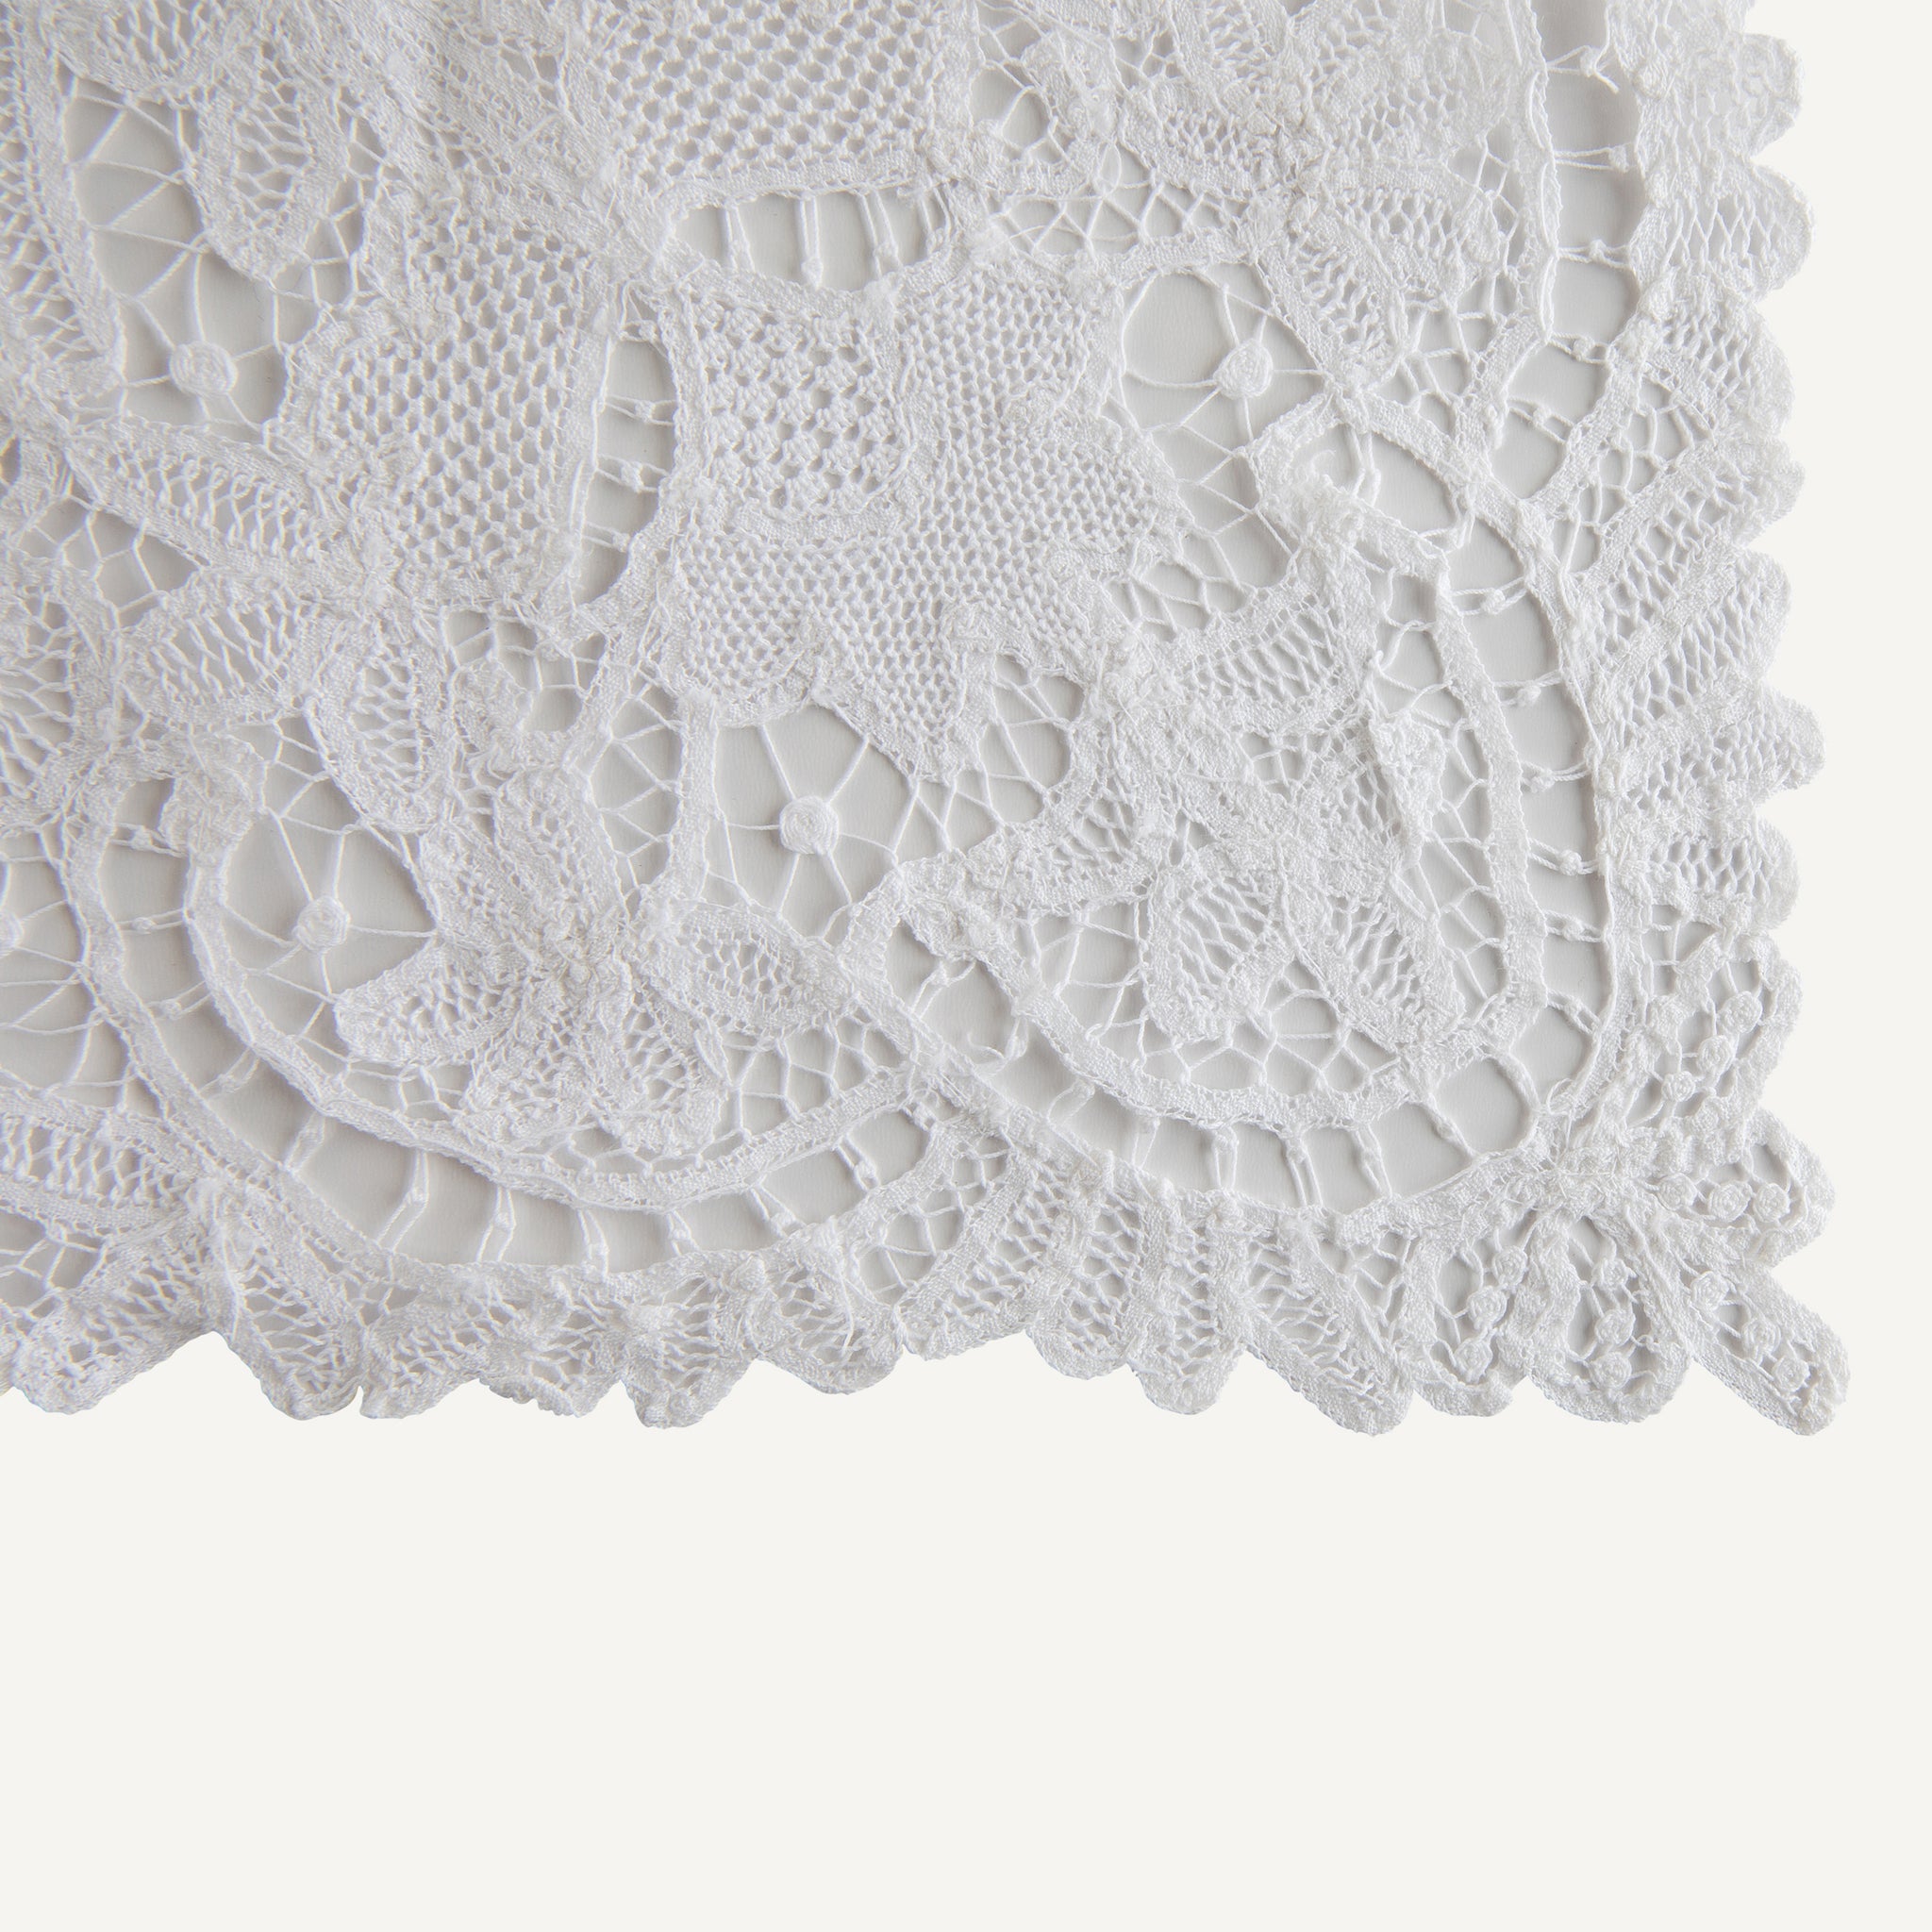 VINTAGE LACE TABLE SCARF